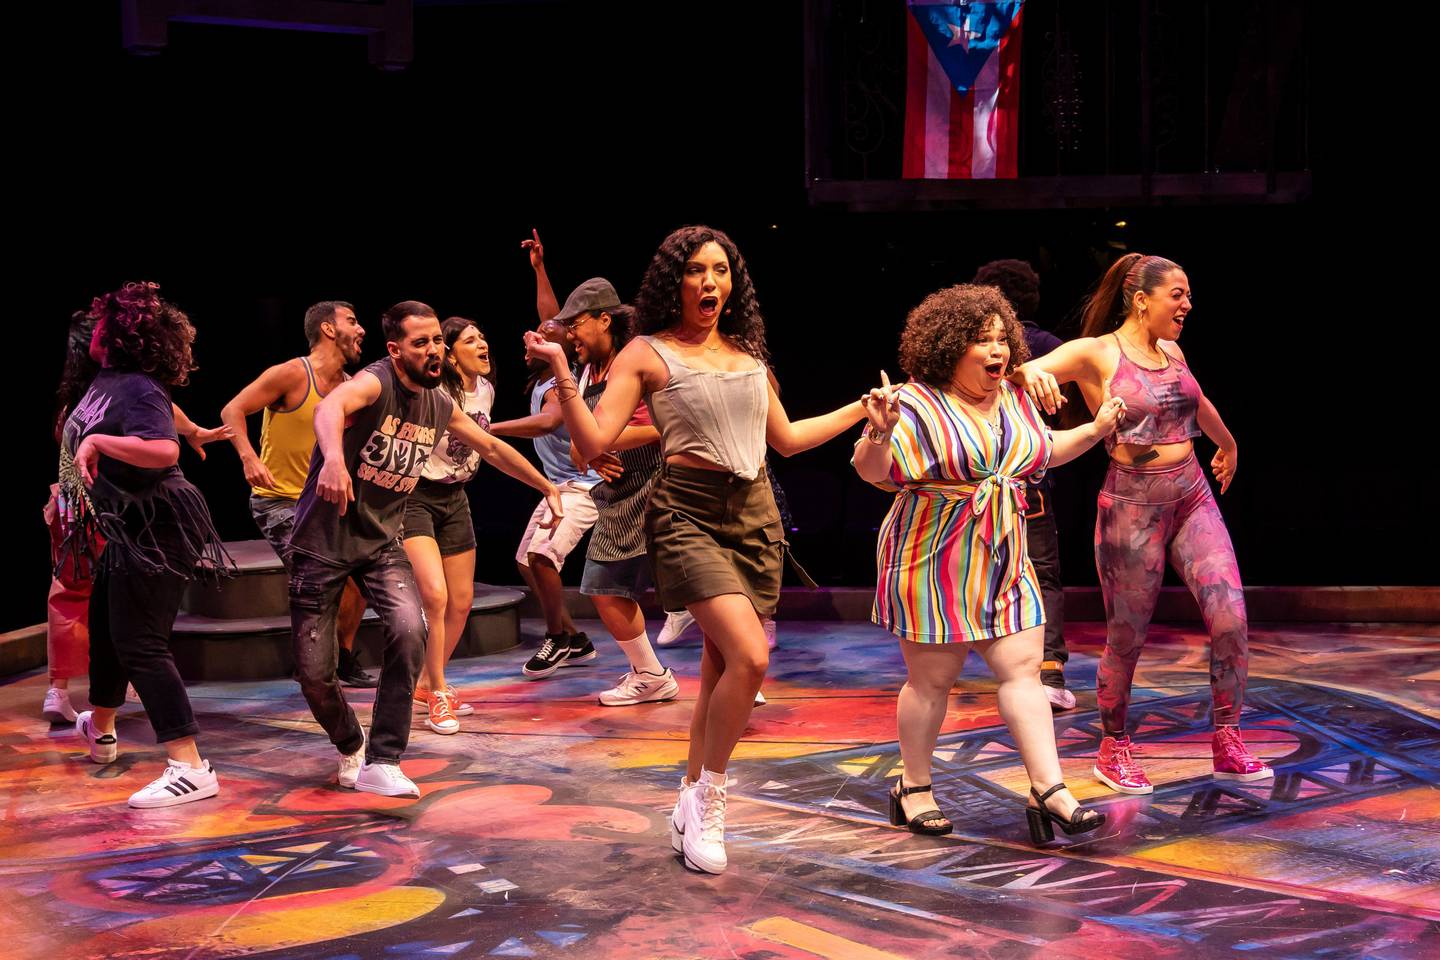 Marriott Theatre presents "In the Heights" in 2024 in Lincolnshire on its theater-in-the-round stage.